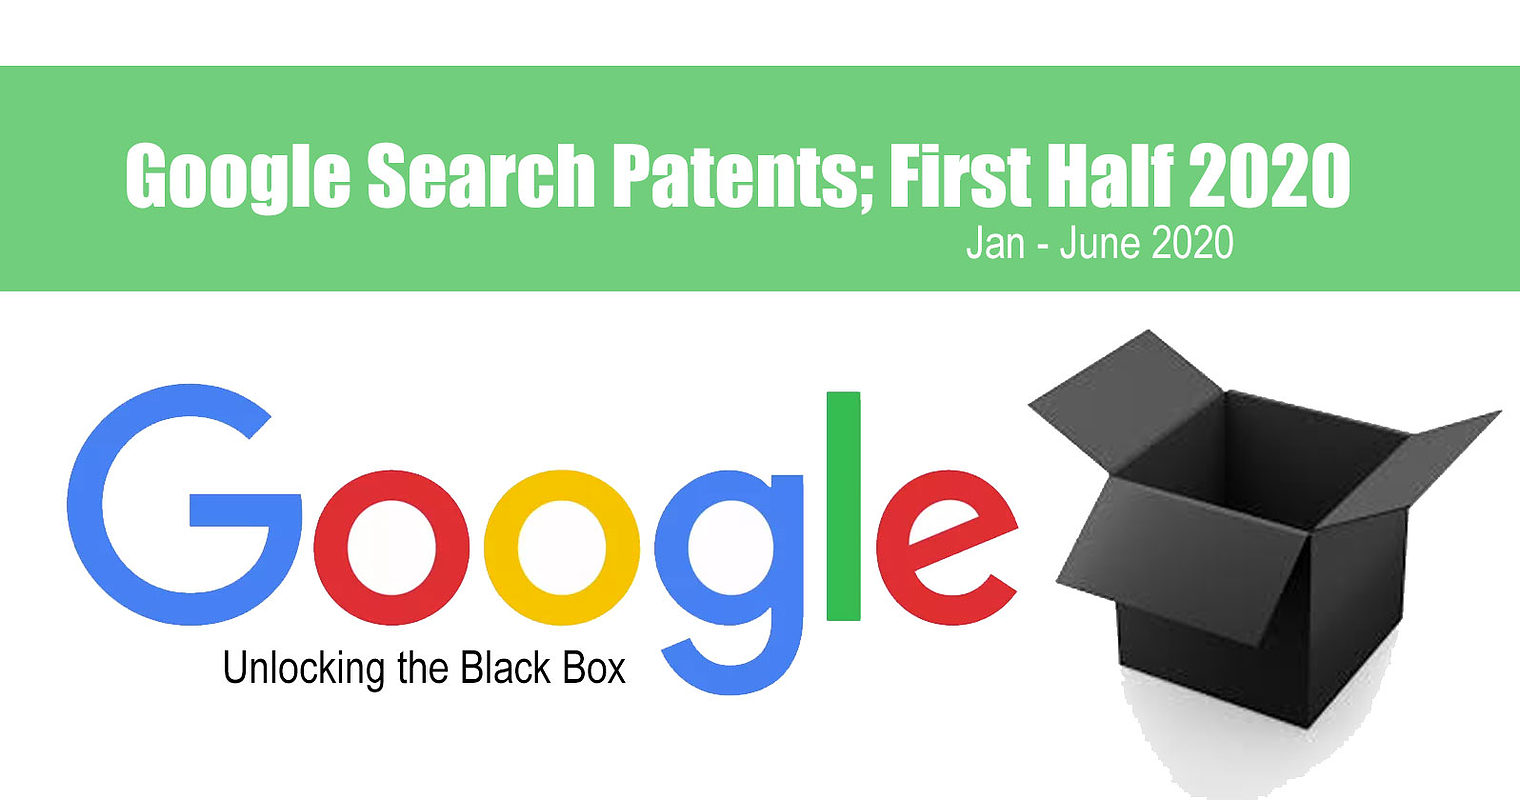 A Rundown of Google Patents from the First Half of 2020